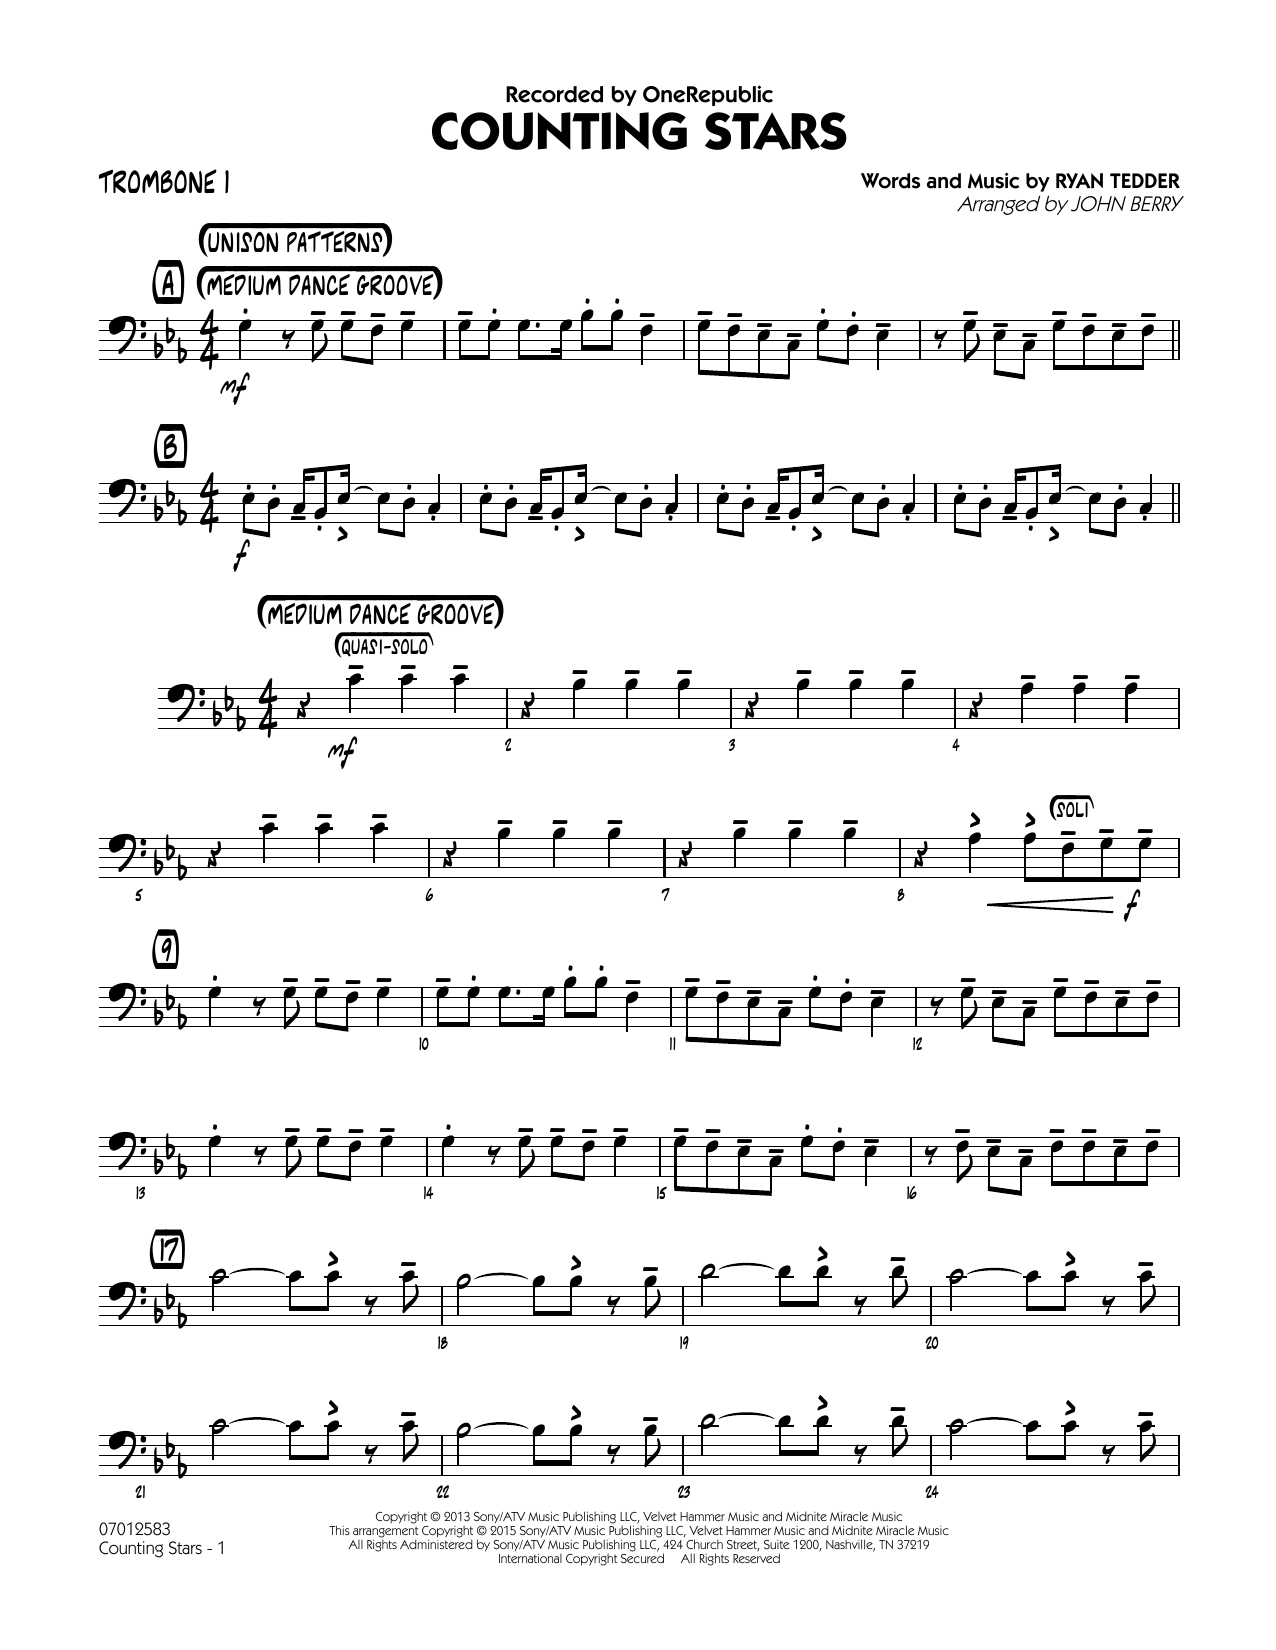 John Berry Counting Stars - Trombone 1 sheet music notes and chords. Download Printable PDF.